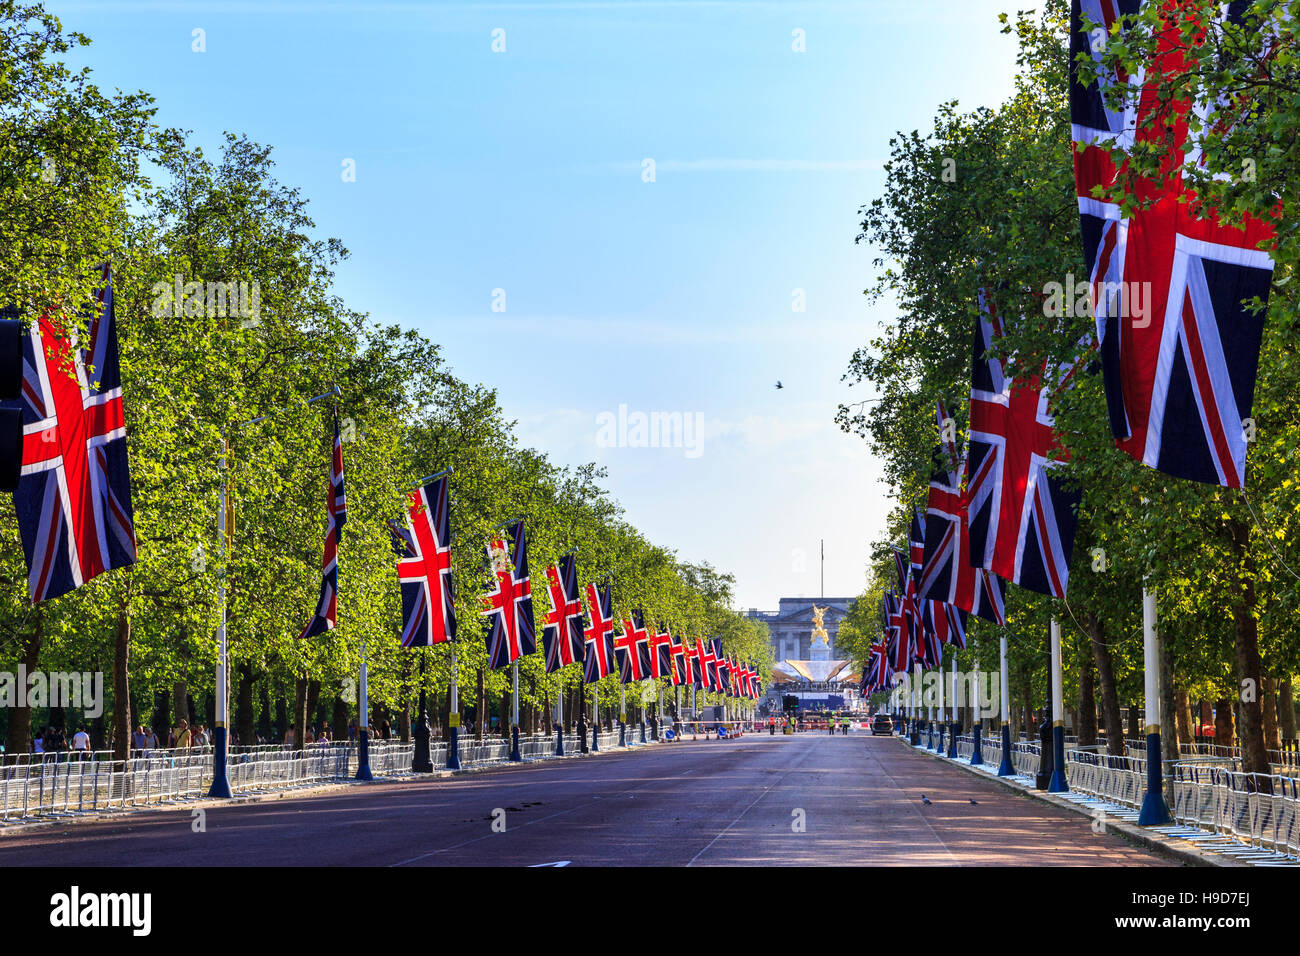 View of Buckingham Palace along The Mall, London, UK, flag-lined in preparation for the Queen's 2012 Diamond Jubilee event Stock Photo